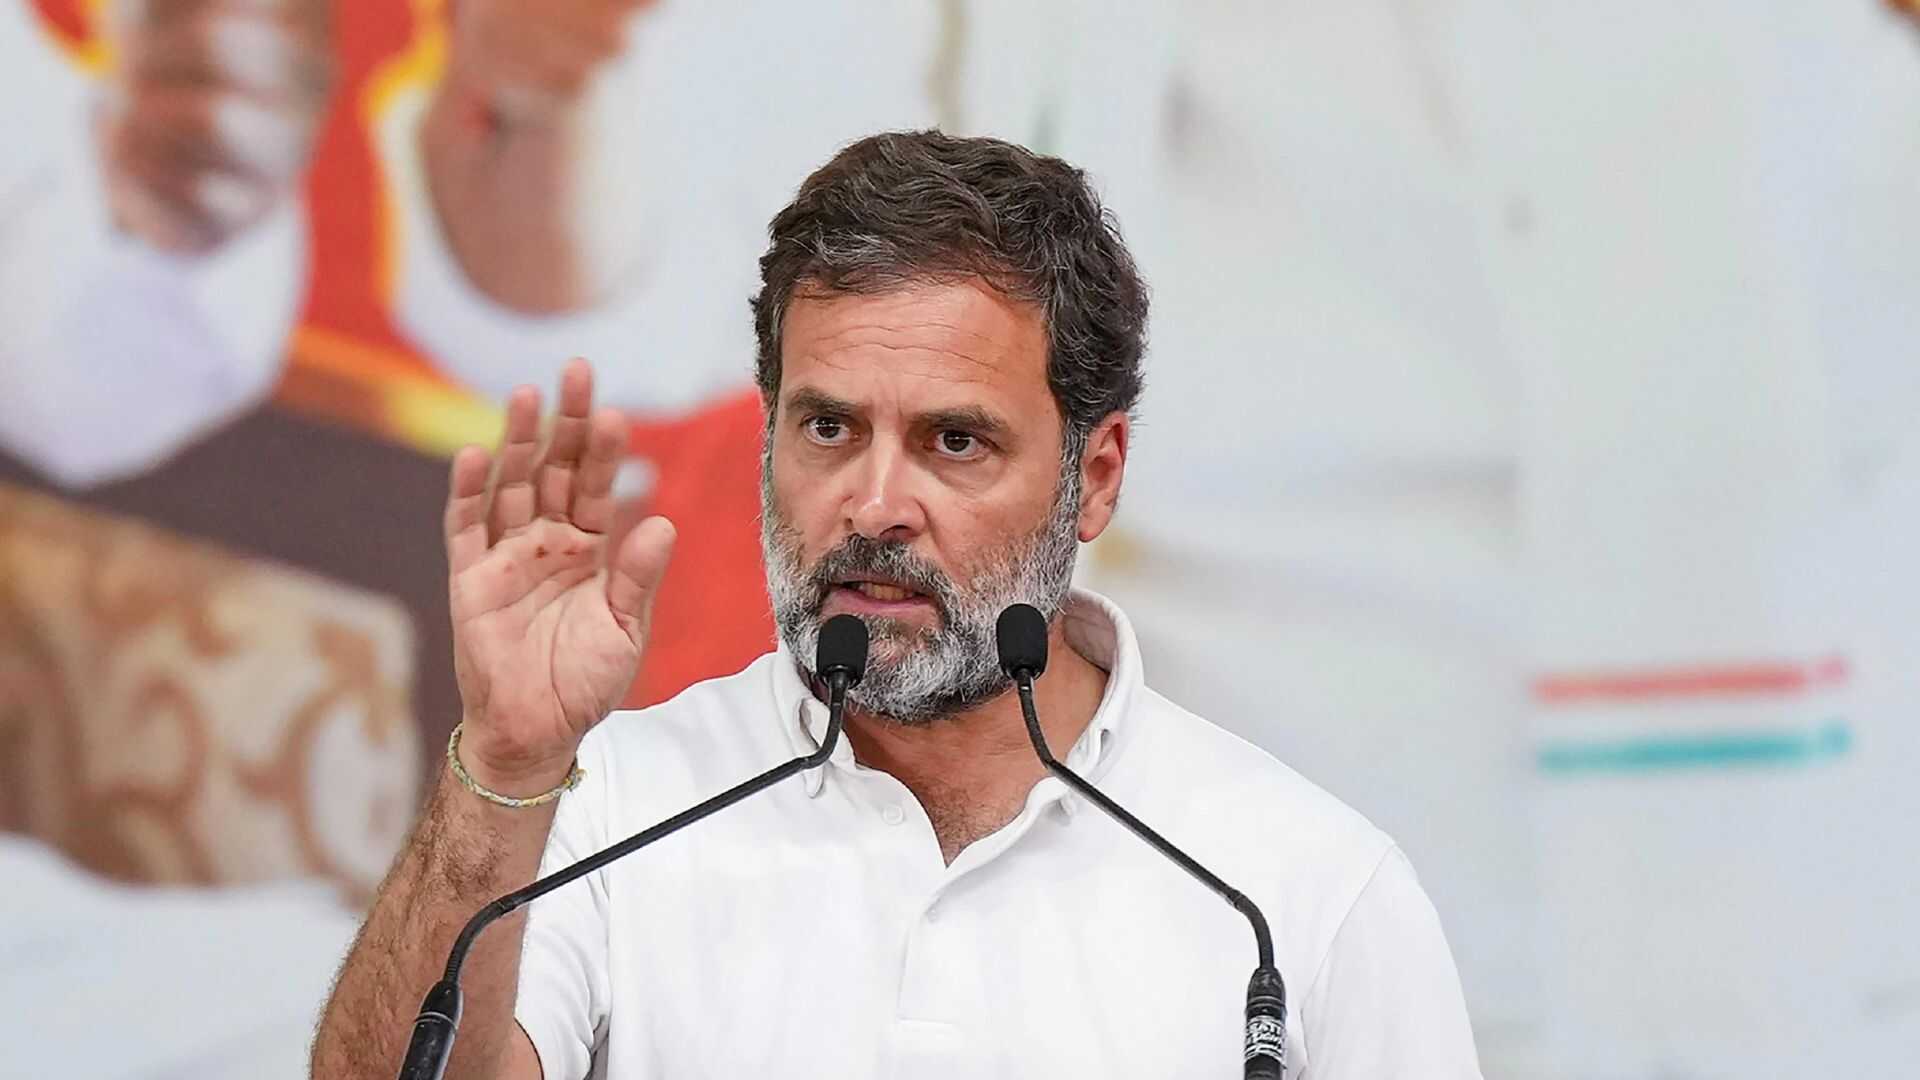 Rahul Gandhi Makes a Sarcastic Comment About PM Modi’s Chest; Questions His ‘Silence’ on NEET Paper Row